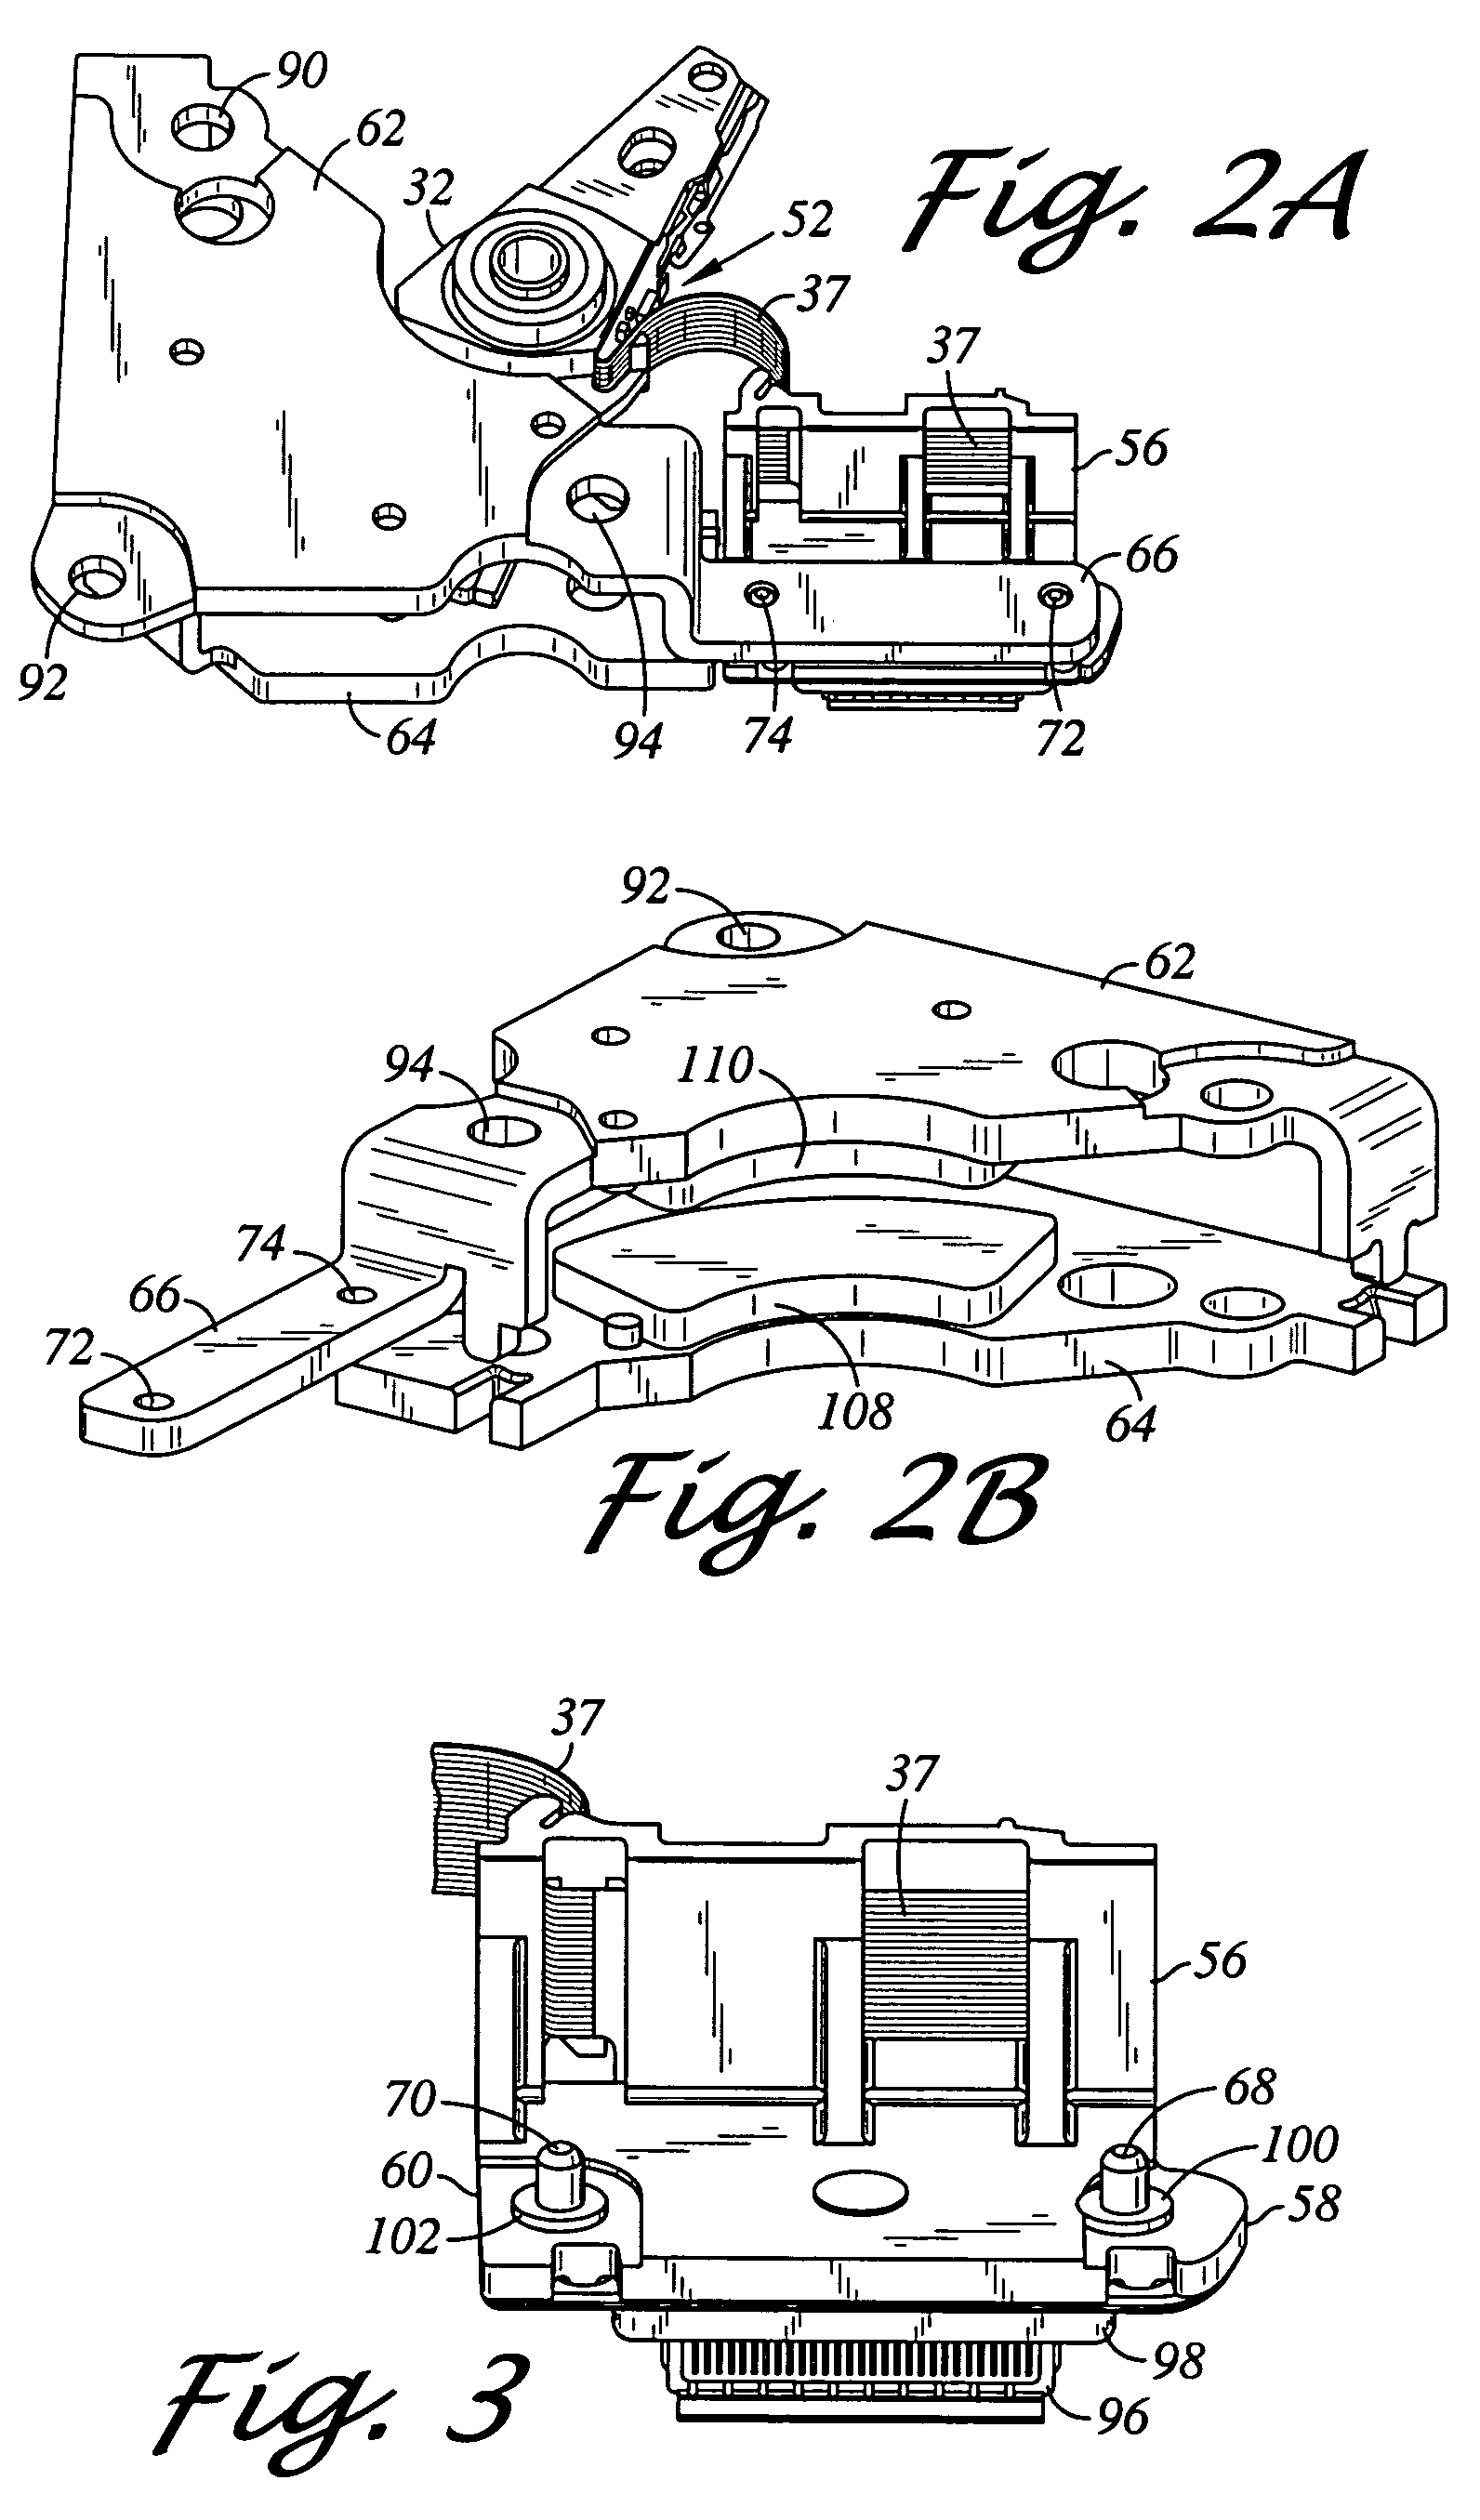 Disk drive having a VCM plate which includes an integrally formed elongated protrusion for securing a flex bracket to the disk drive base